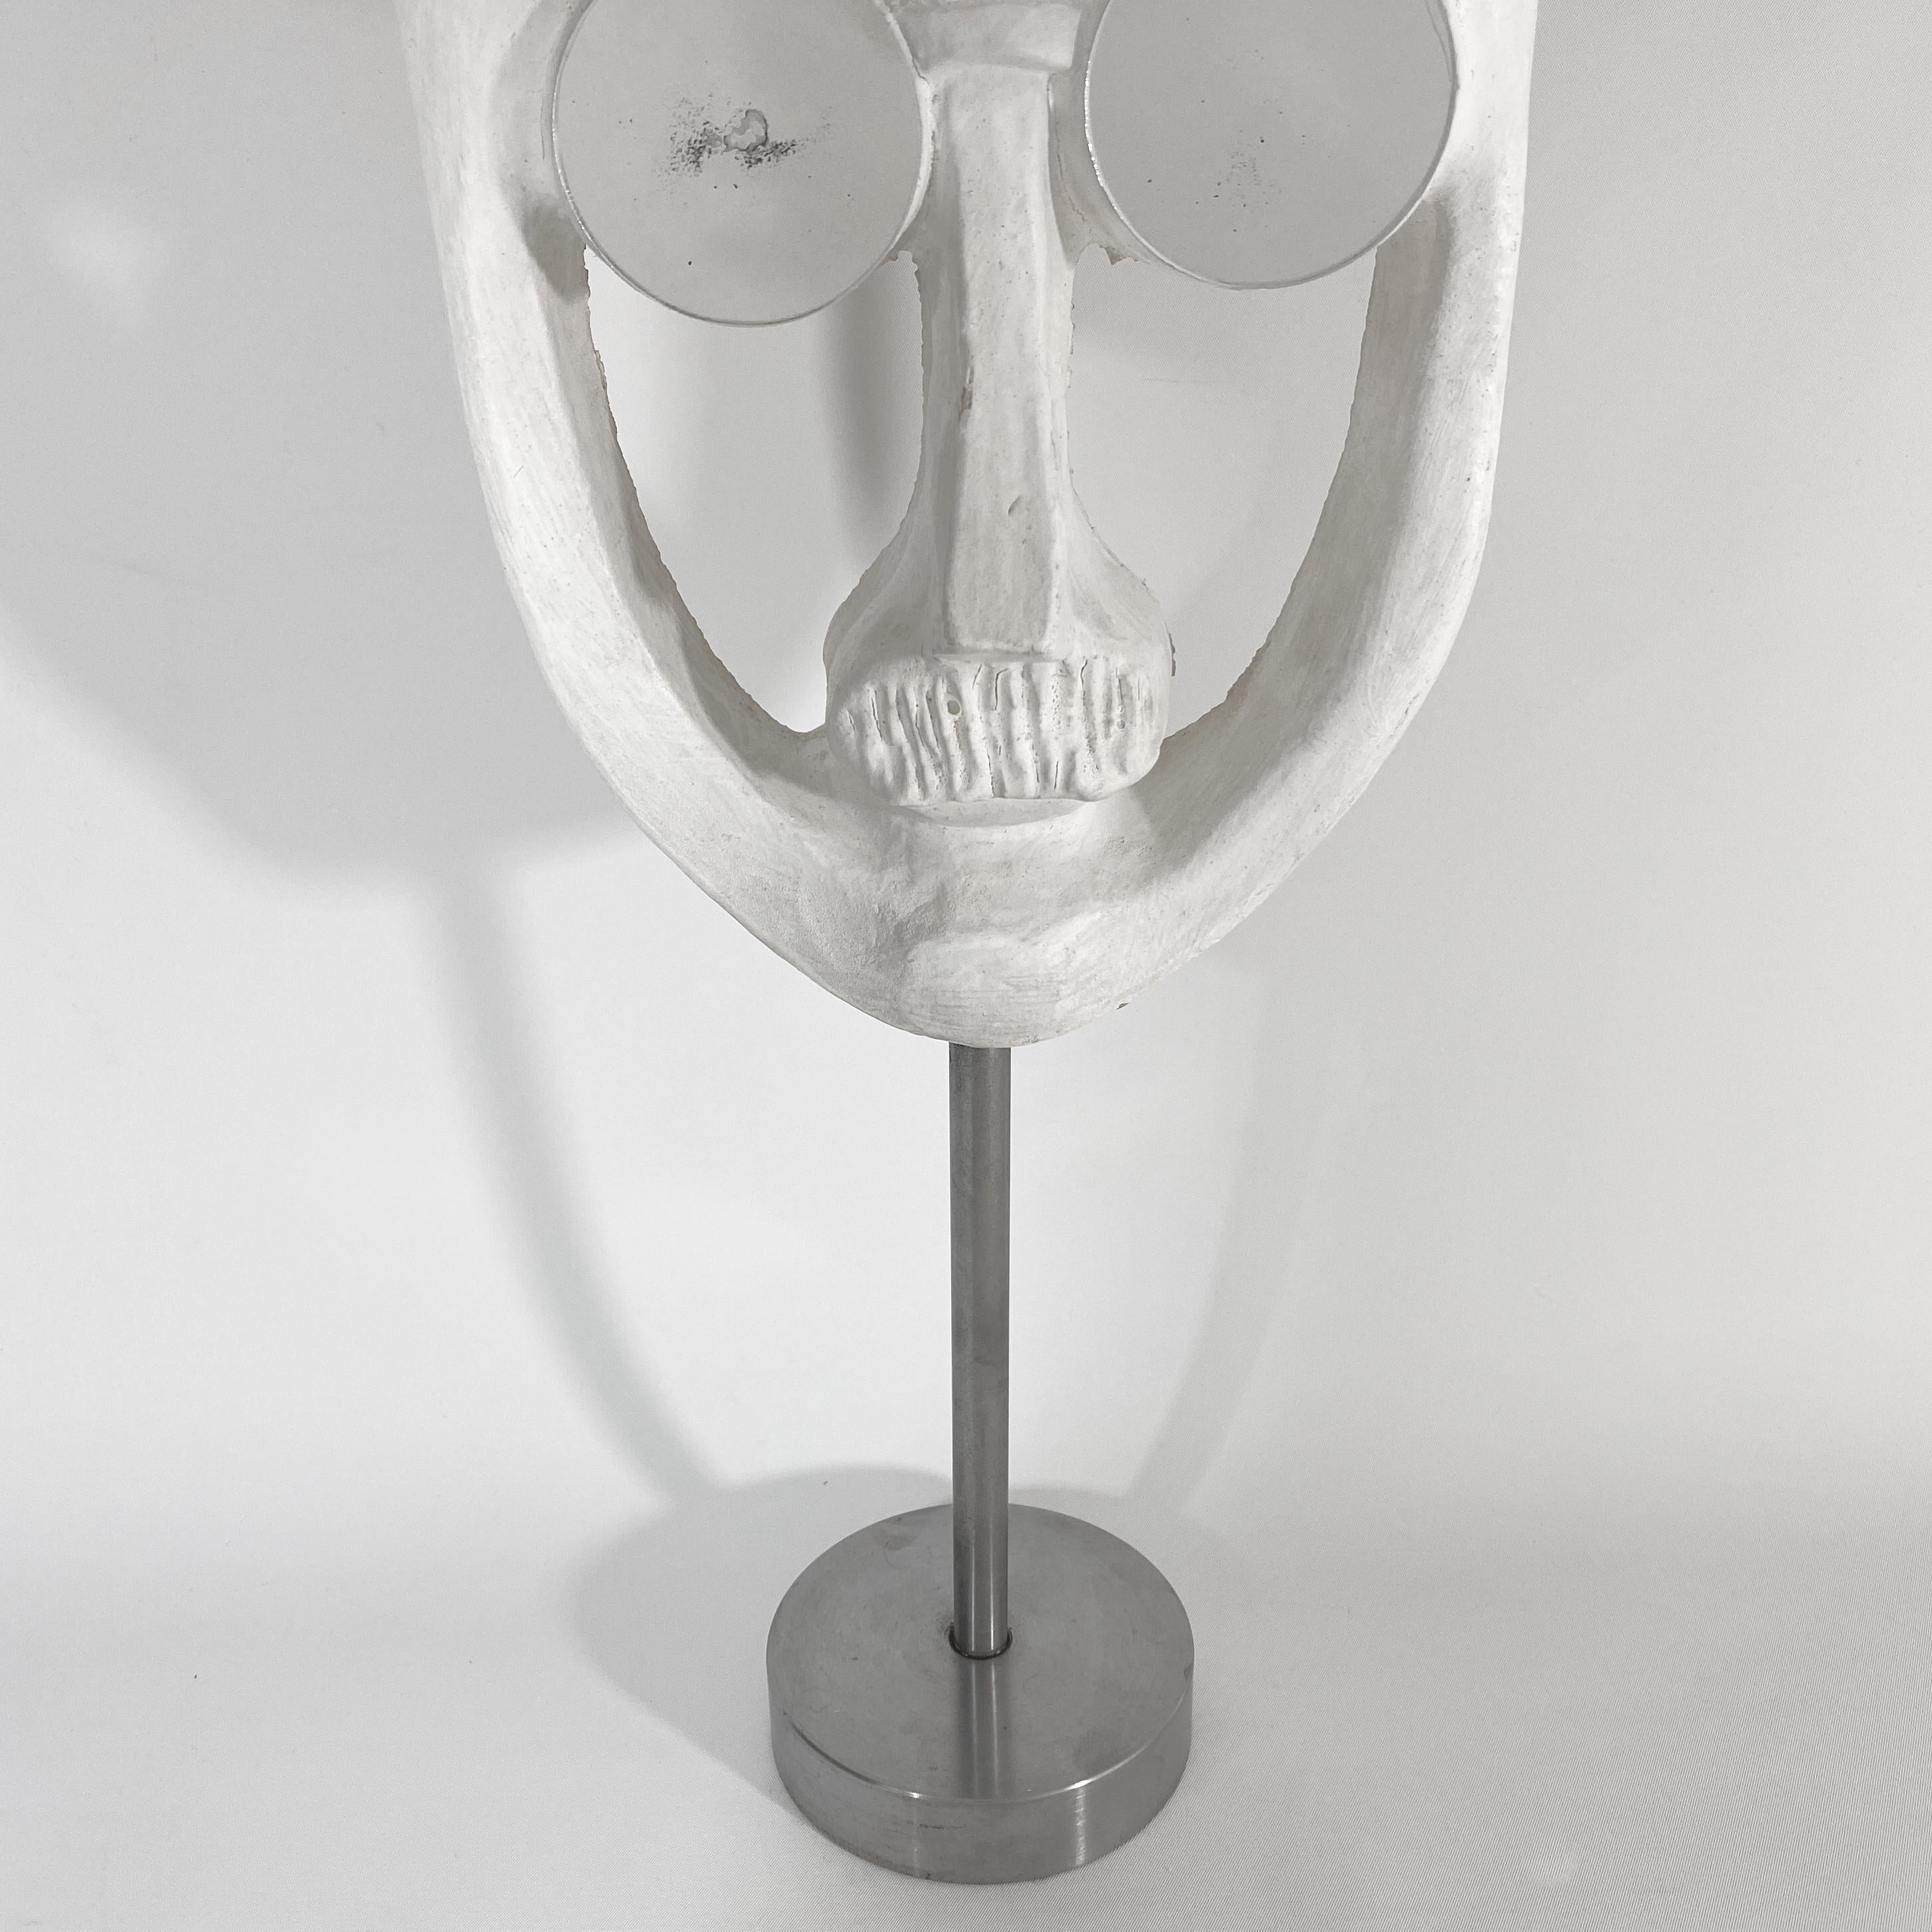 American David Gil Bennington Potters Mirrored Glasses Mid Century Sculpture Mask For Sale